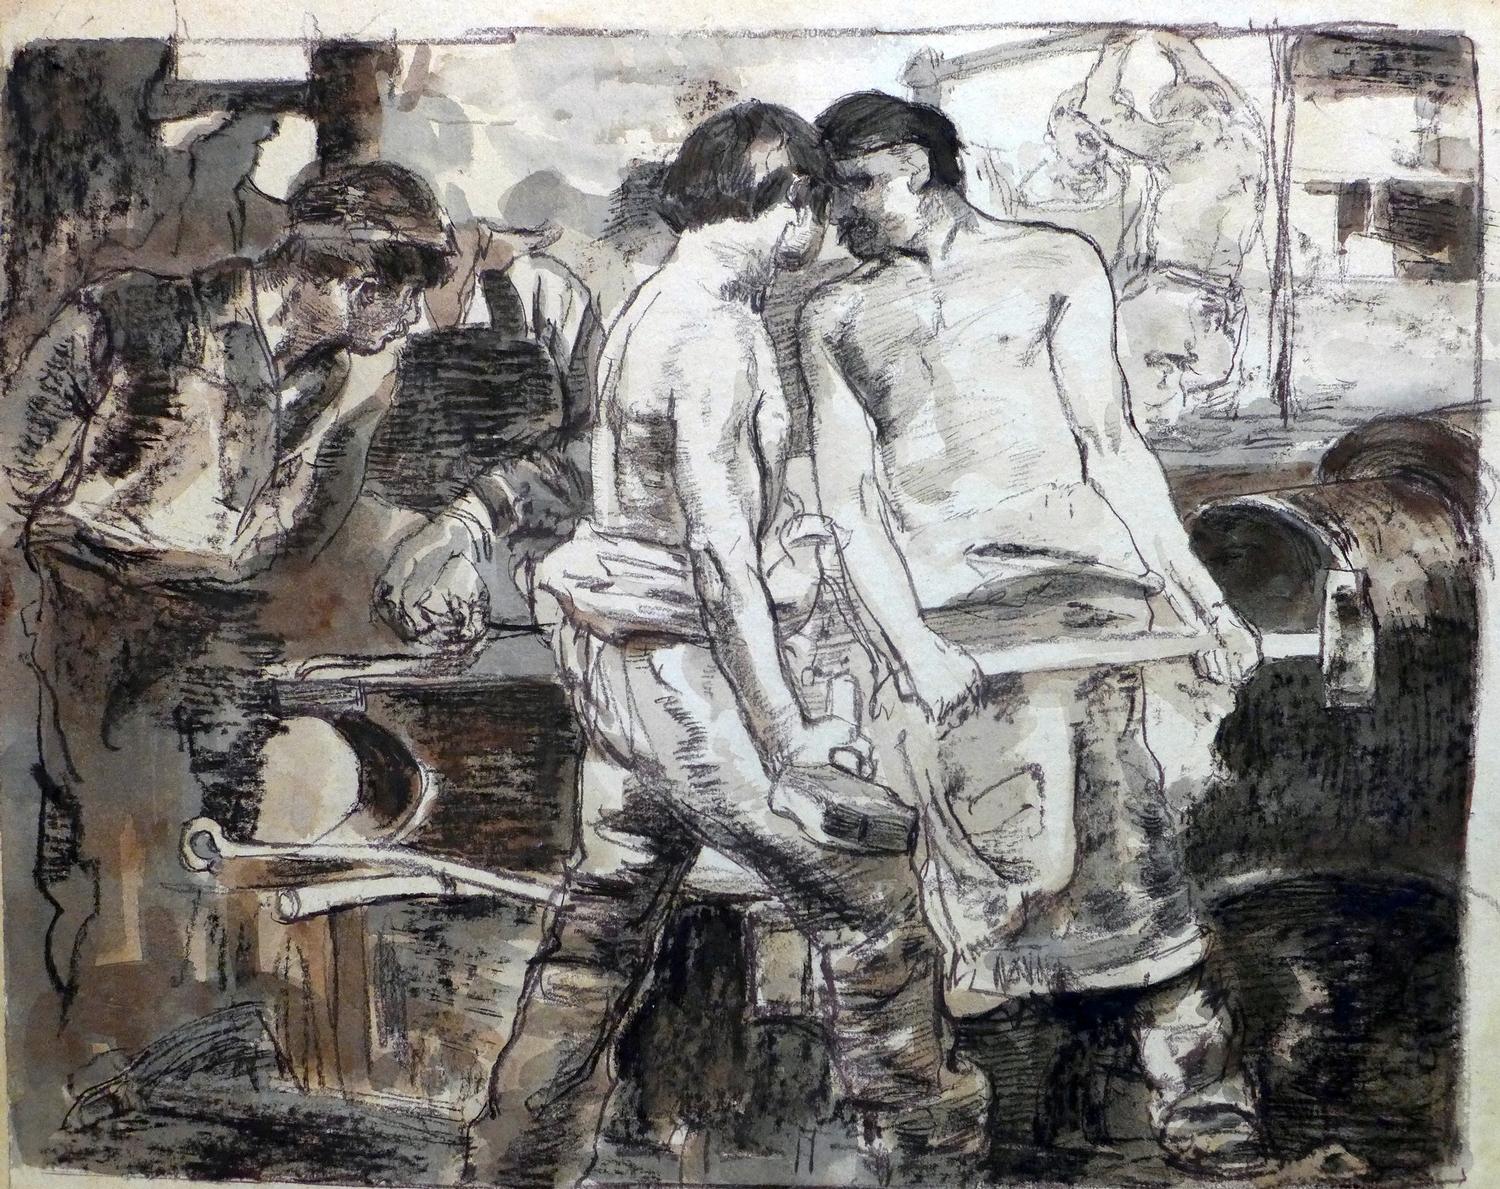 Attributed to Frank Brangwyn (British,1867-1956), 'Blacksmiths', chalk and watercolour on paper, H.